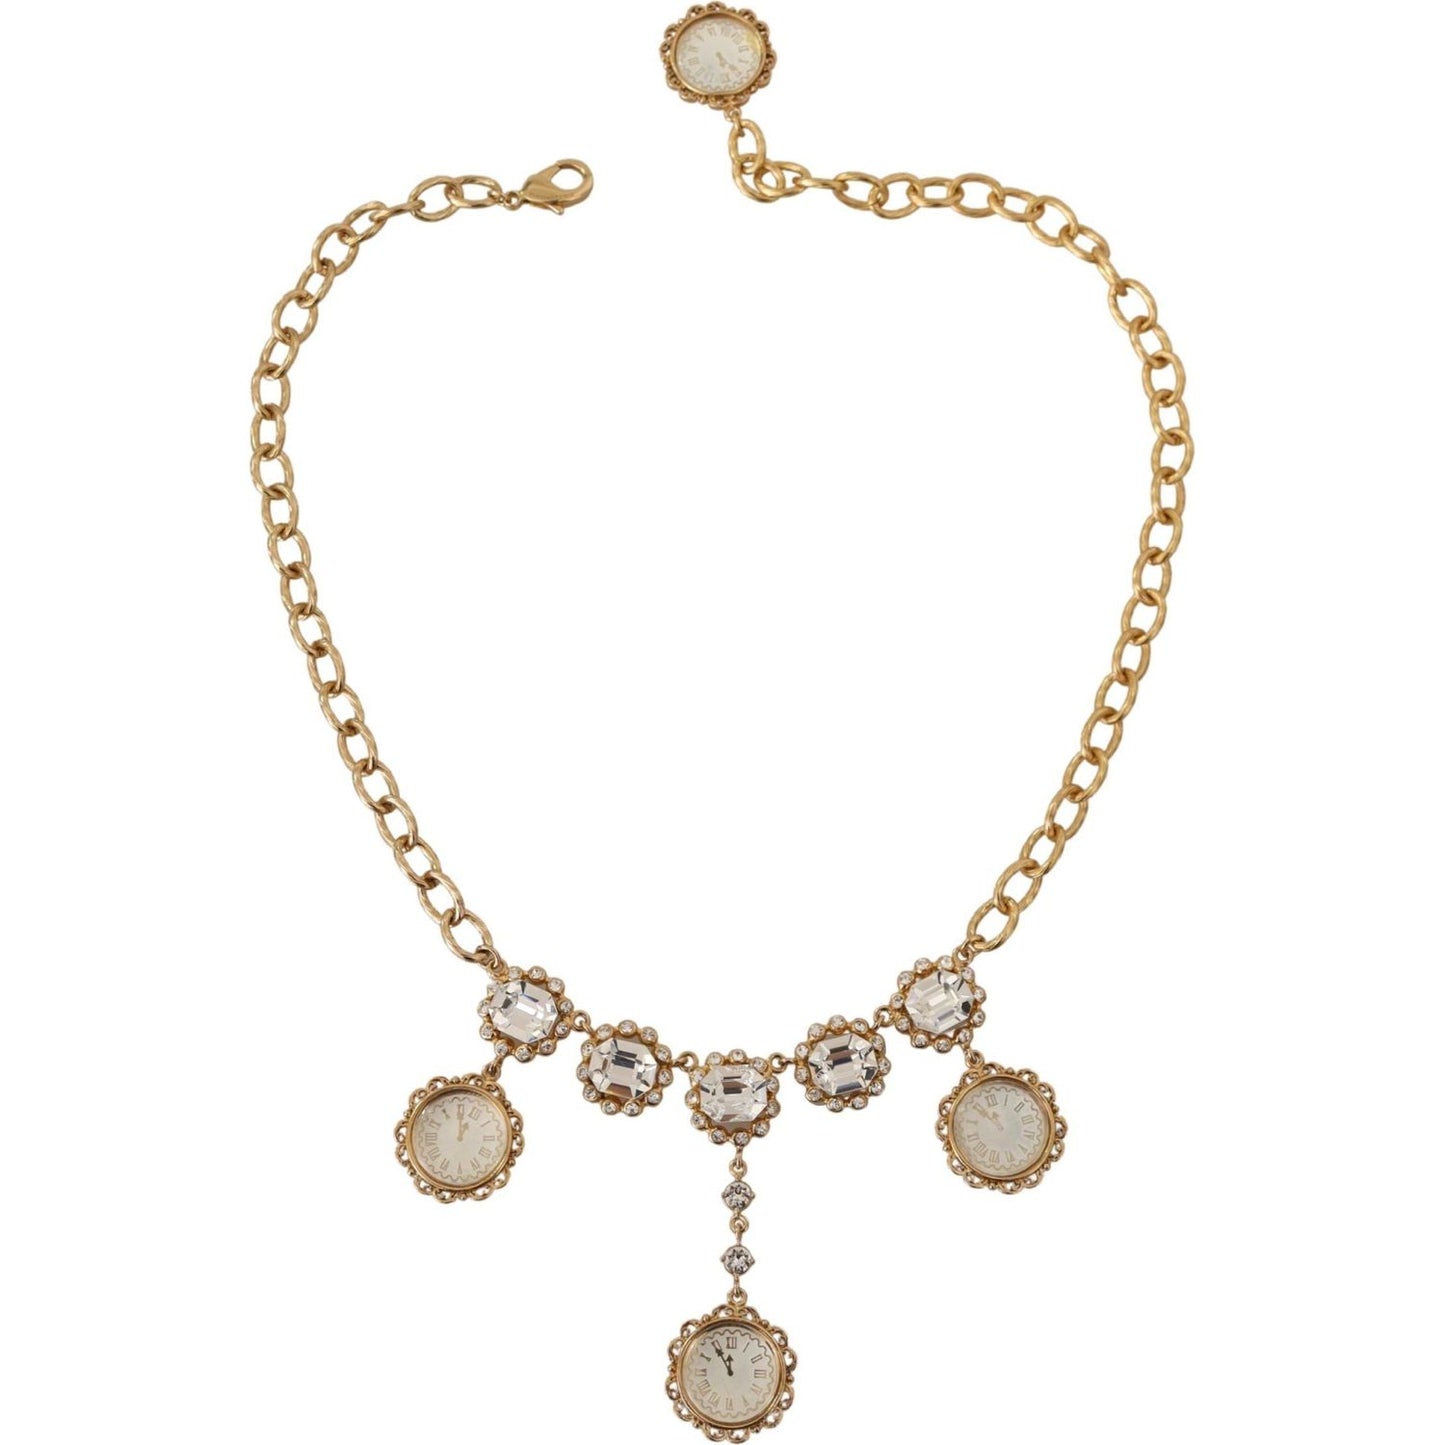 Dolce & Gabbana Elegant Timeless Statement Necklace gold-clock-statement-crystal-chain-necklace WOMAN NECKLACE IMG_2025-scaled-139fbb8f-379.jpg